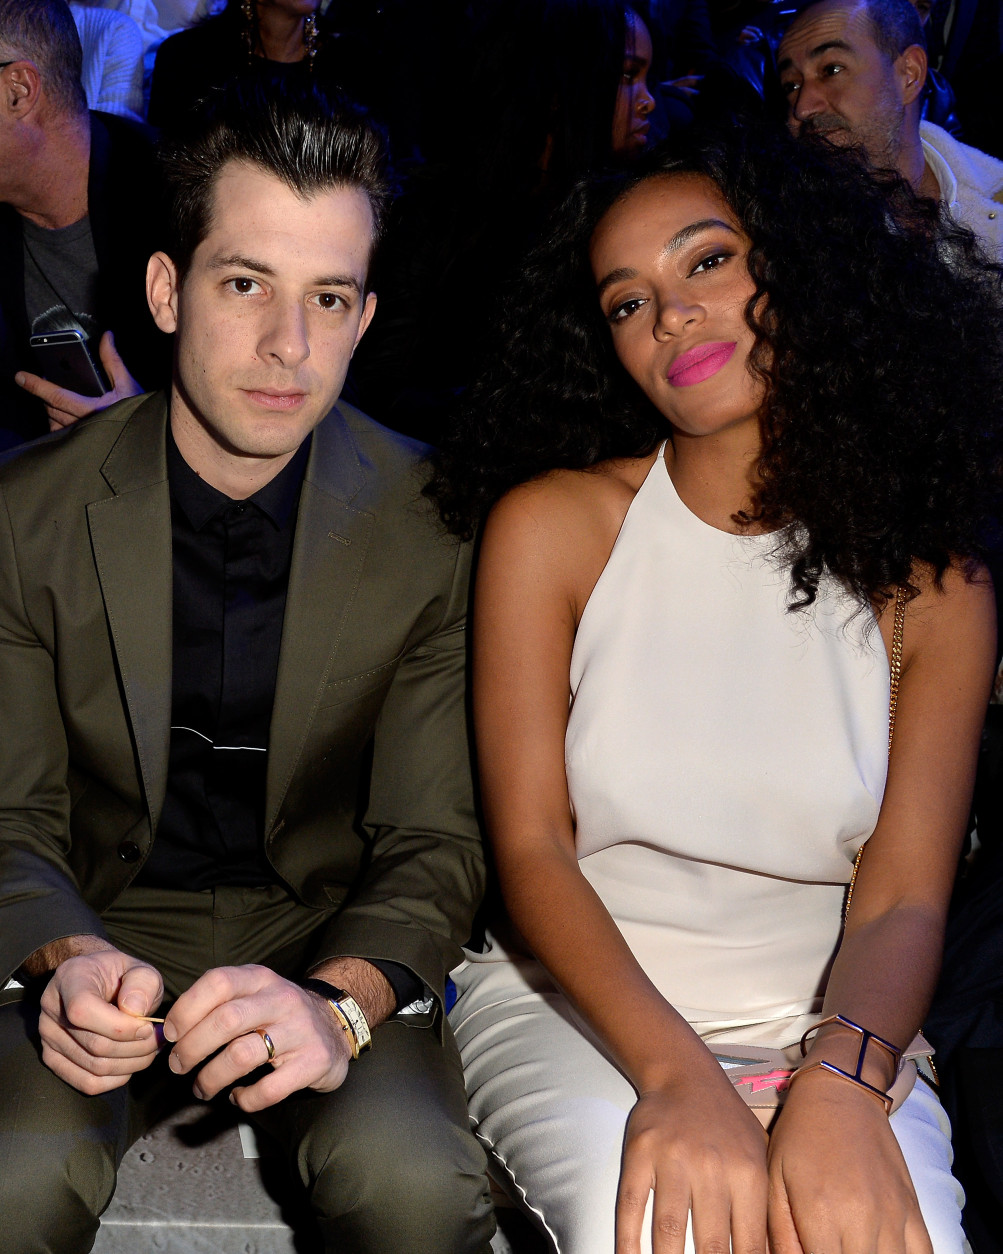 PARIS, FRANCE - MARCH 04:  Mark Ronson and Solange Knowles attend the H&amp;M show as part of the Paris Fashion Week Womenswear Fall/Winter 2015/2016  on March 4, 2015 in Paris, France.  (Photo by Pascal Le Segretain/Getty Images)